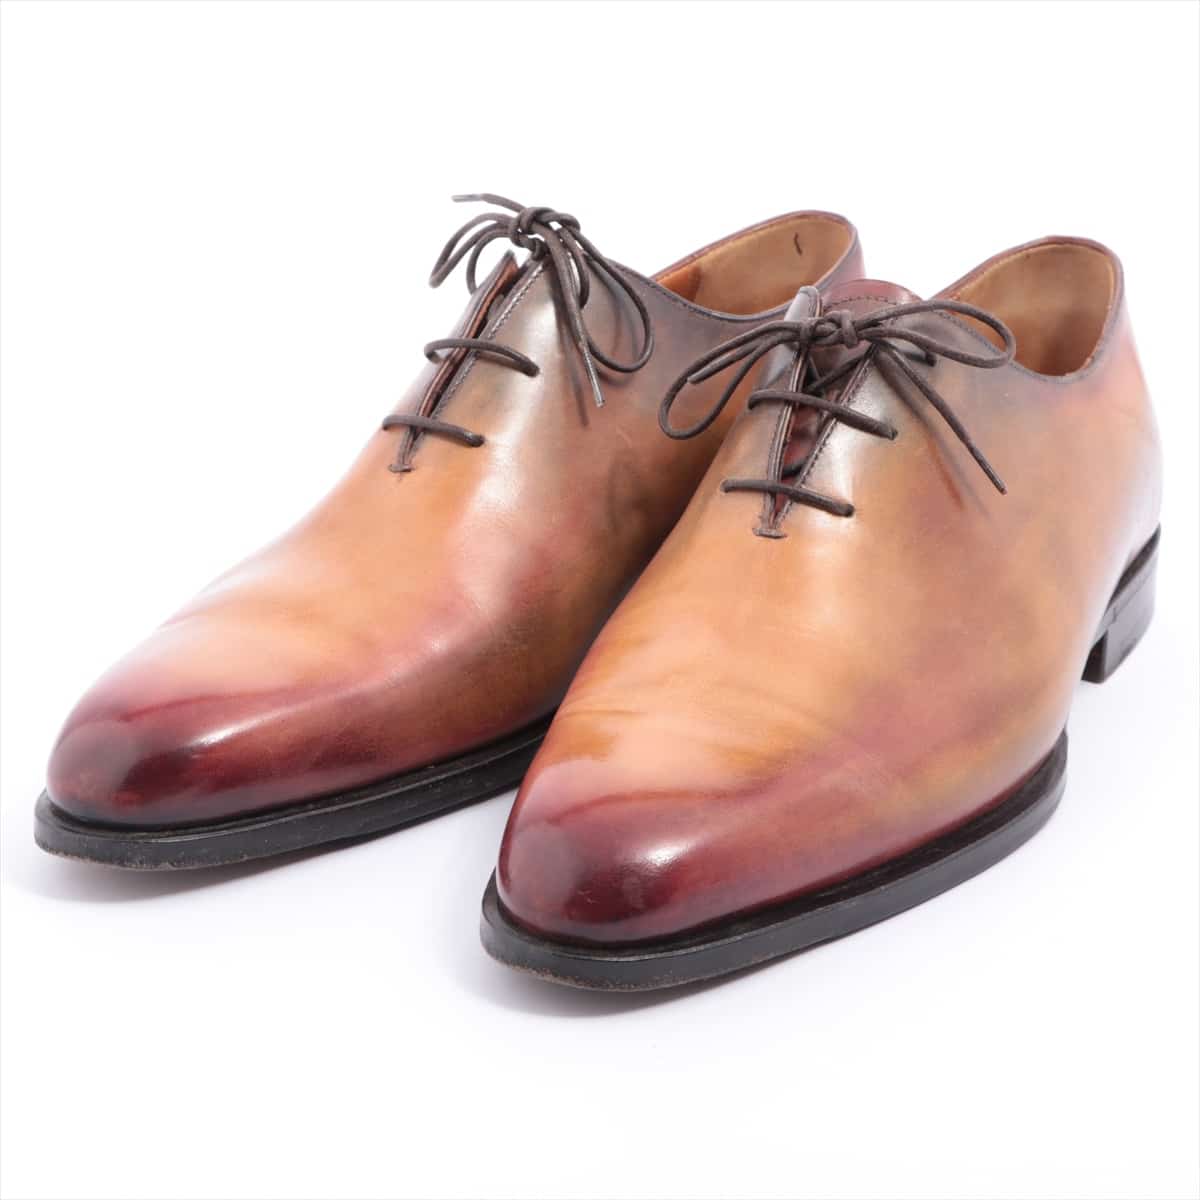 Berluti Leather Leather shoes 8 Men's Brown Hole cut